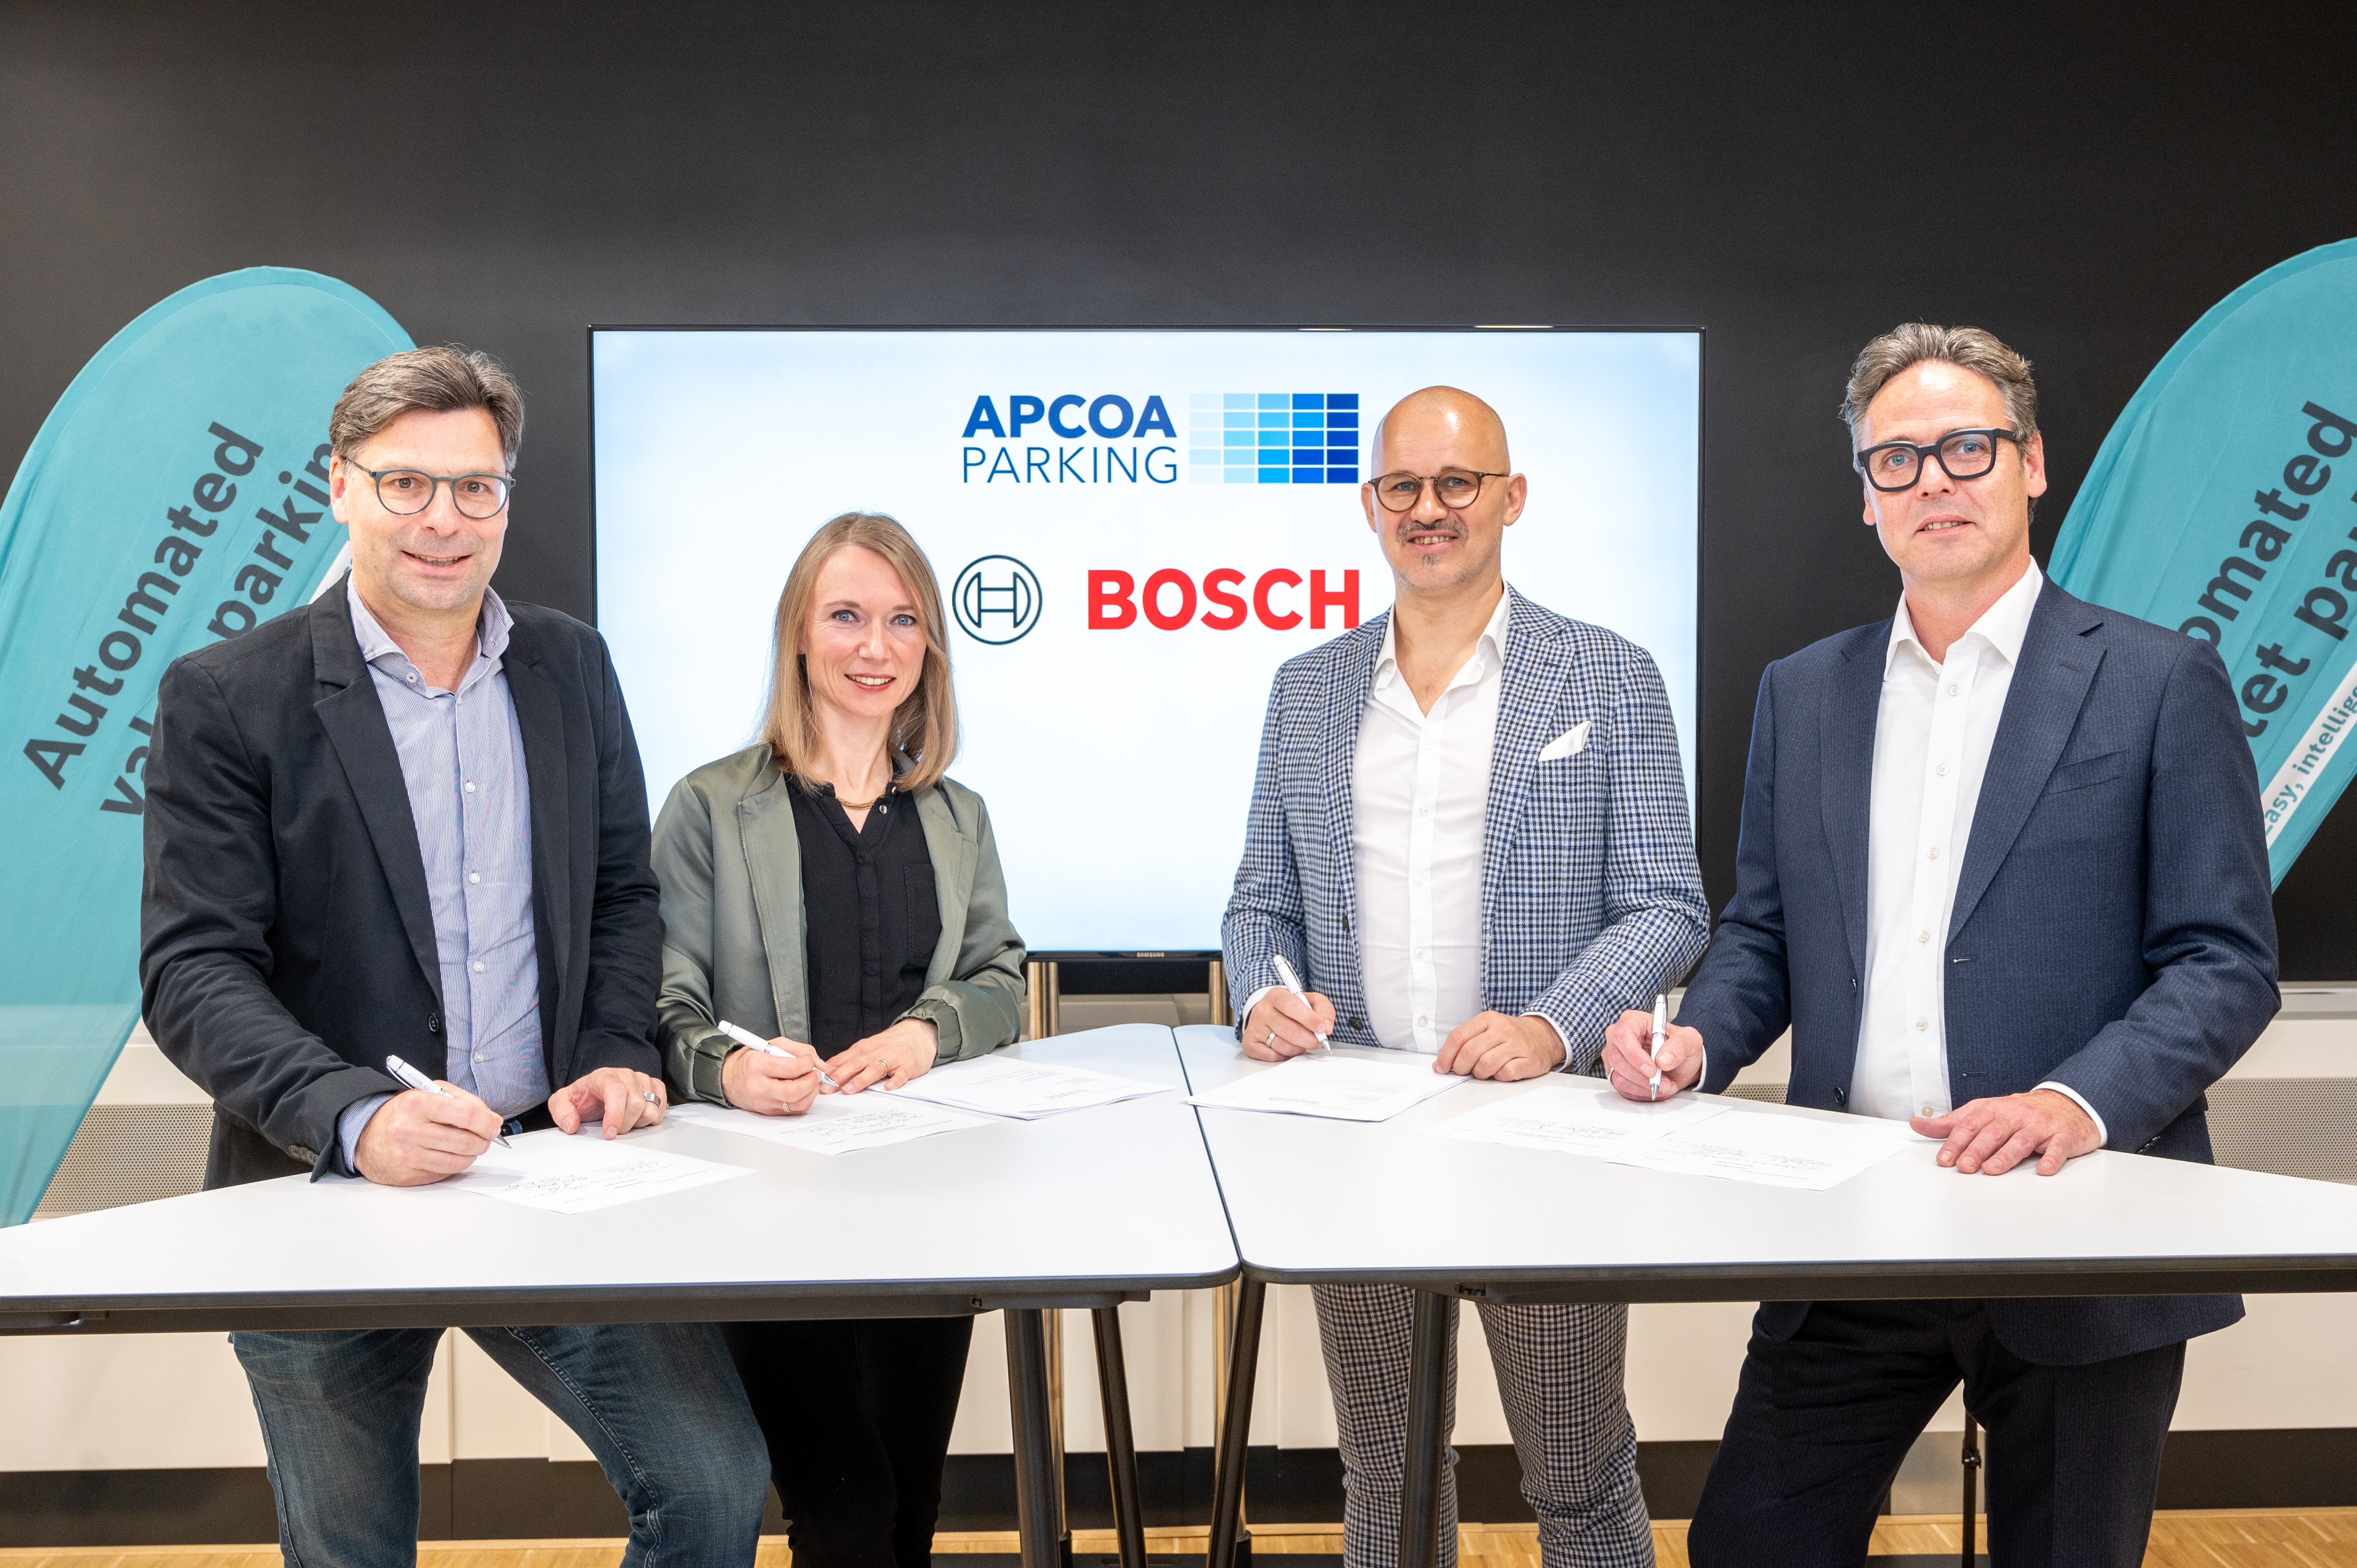 Bosch and APCOA roll out Automated Valet Parking across Germany